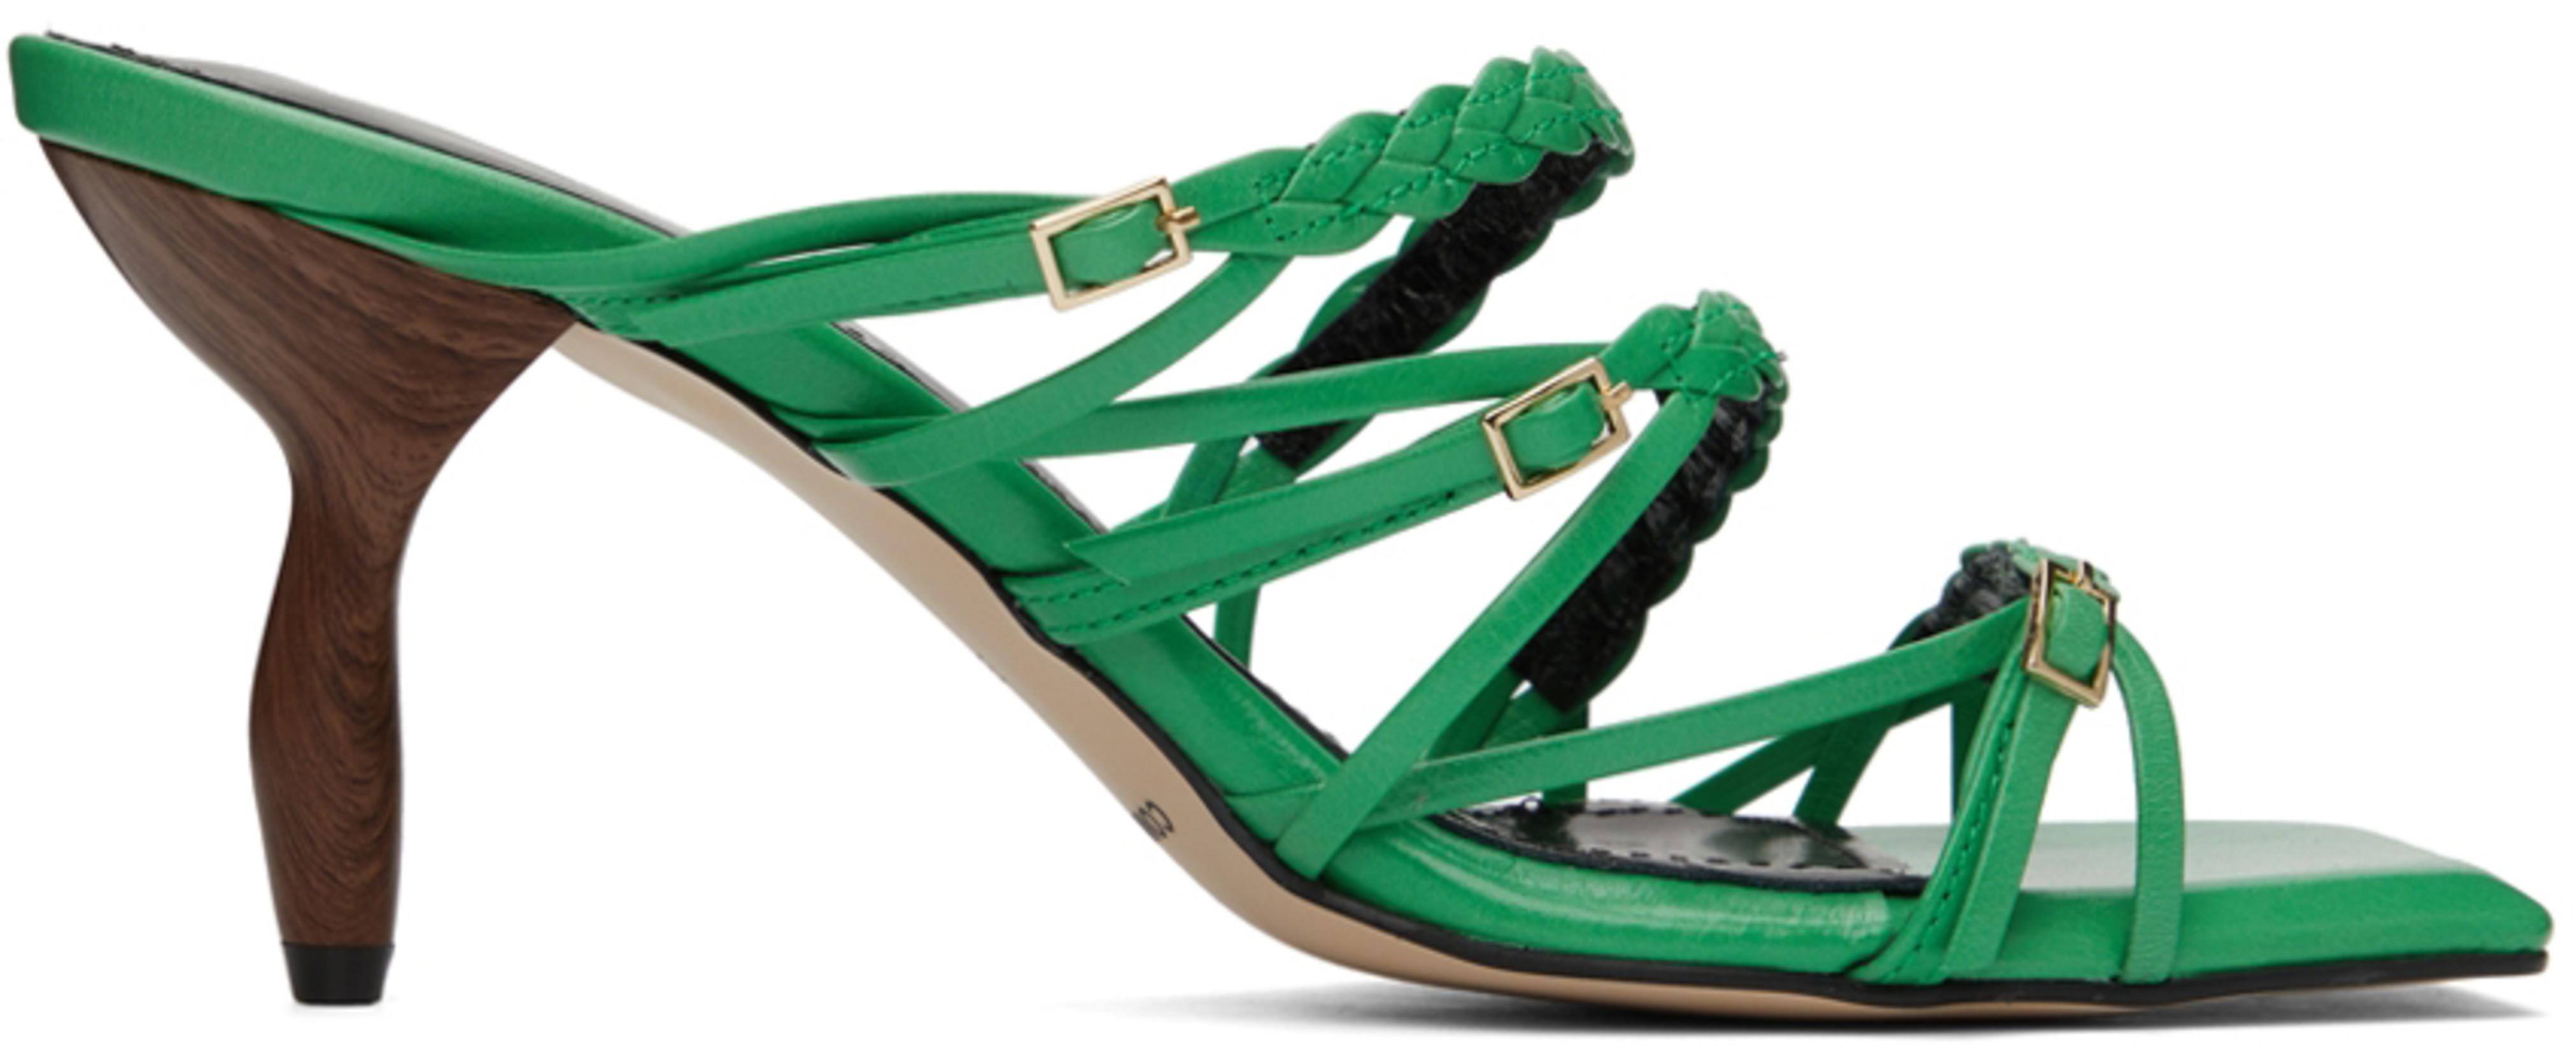 SSENSE Exclusive Green Attitude Heels by COMME SE-A